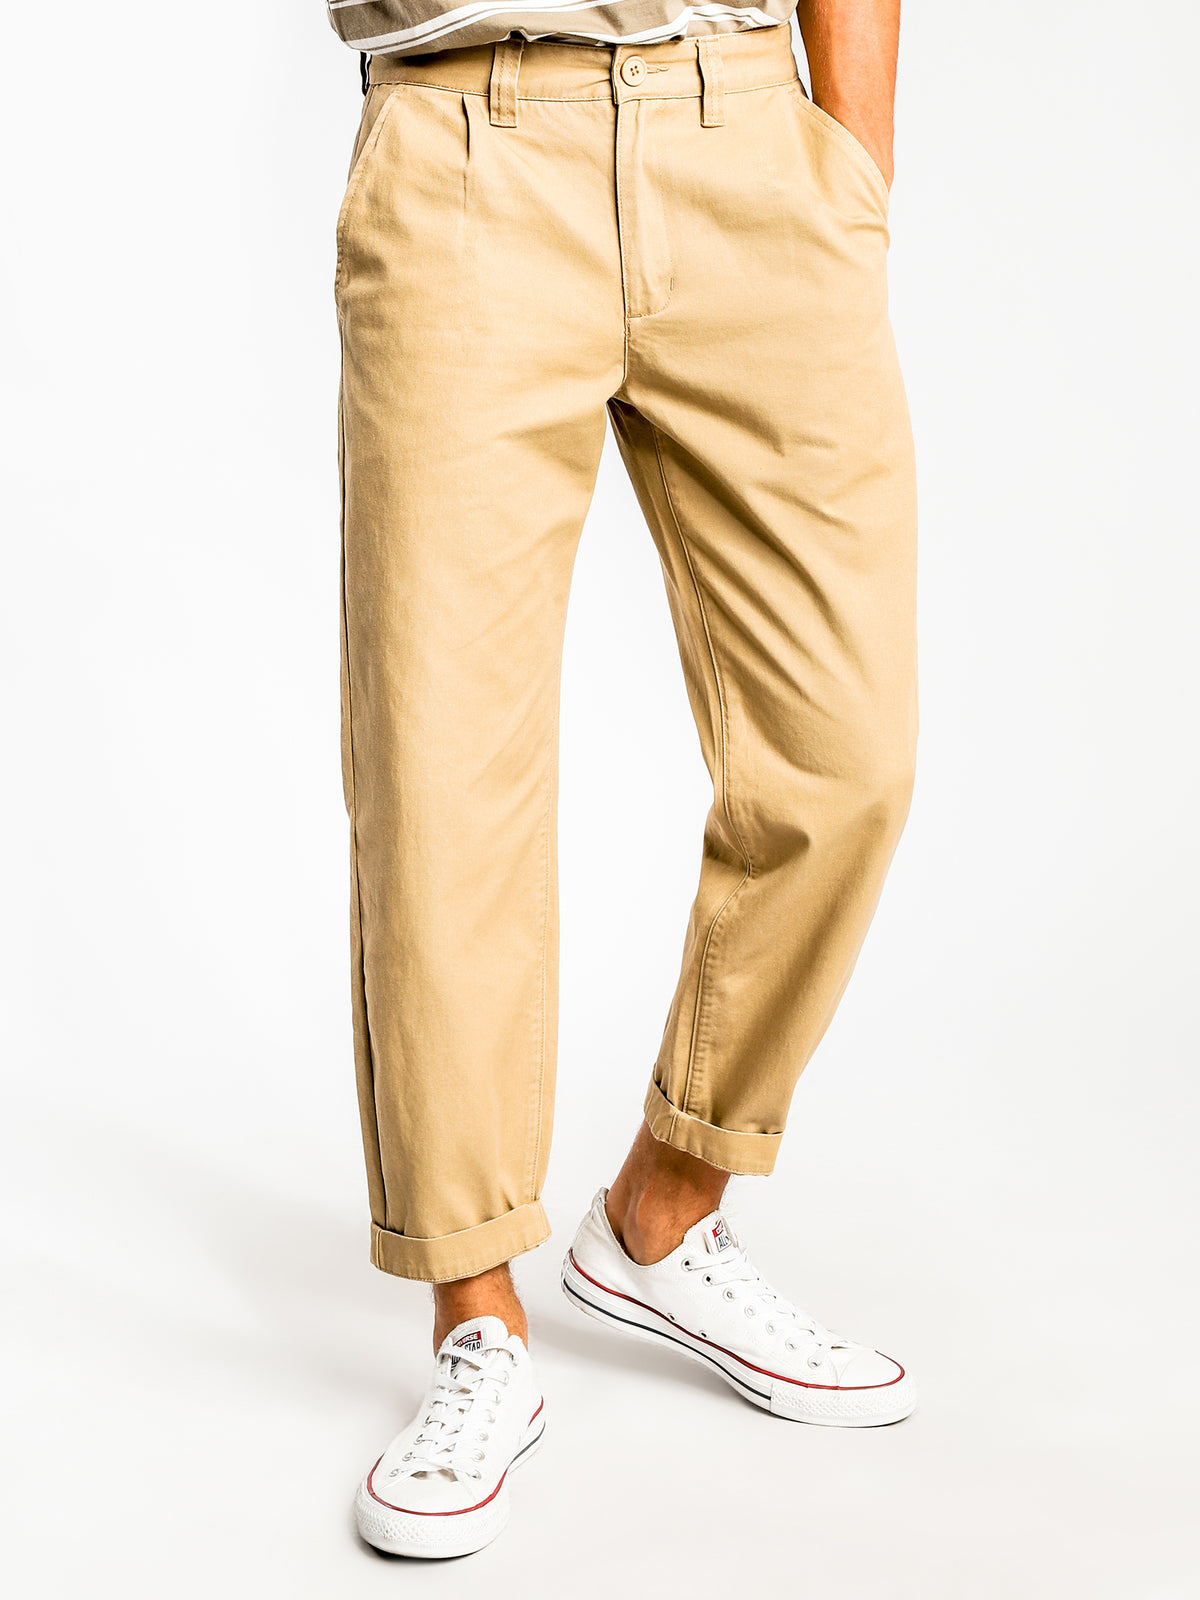 Beau Pleated Pants in Stone